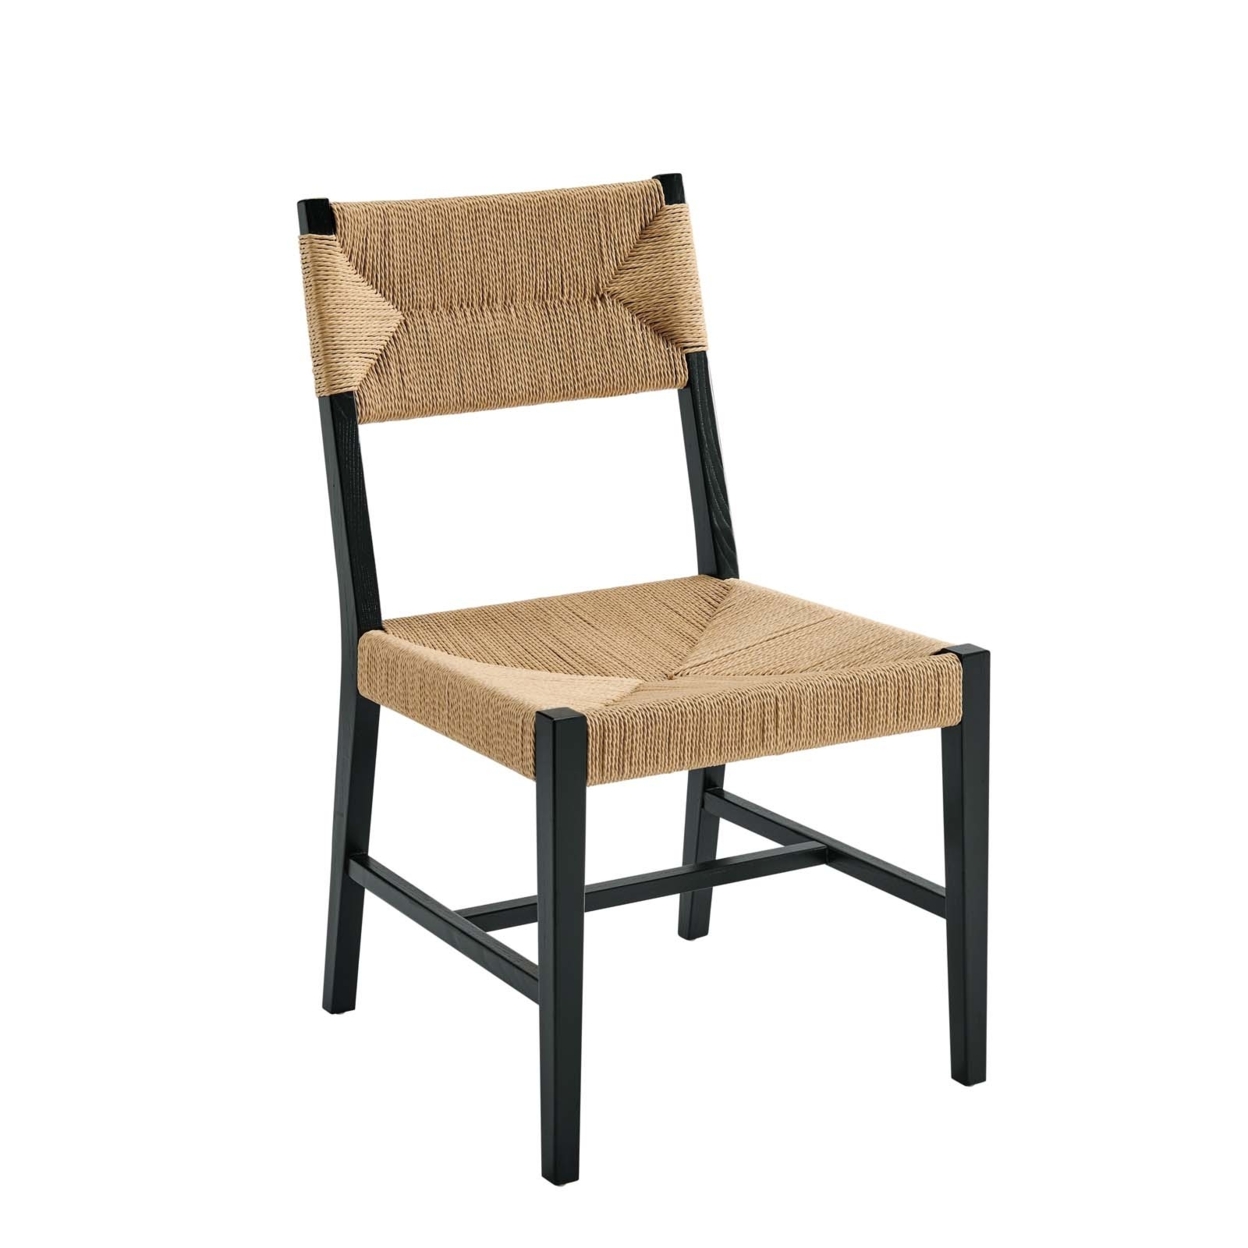 Bodie Wood Dining Chair, Black Natural